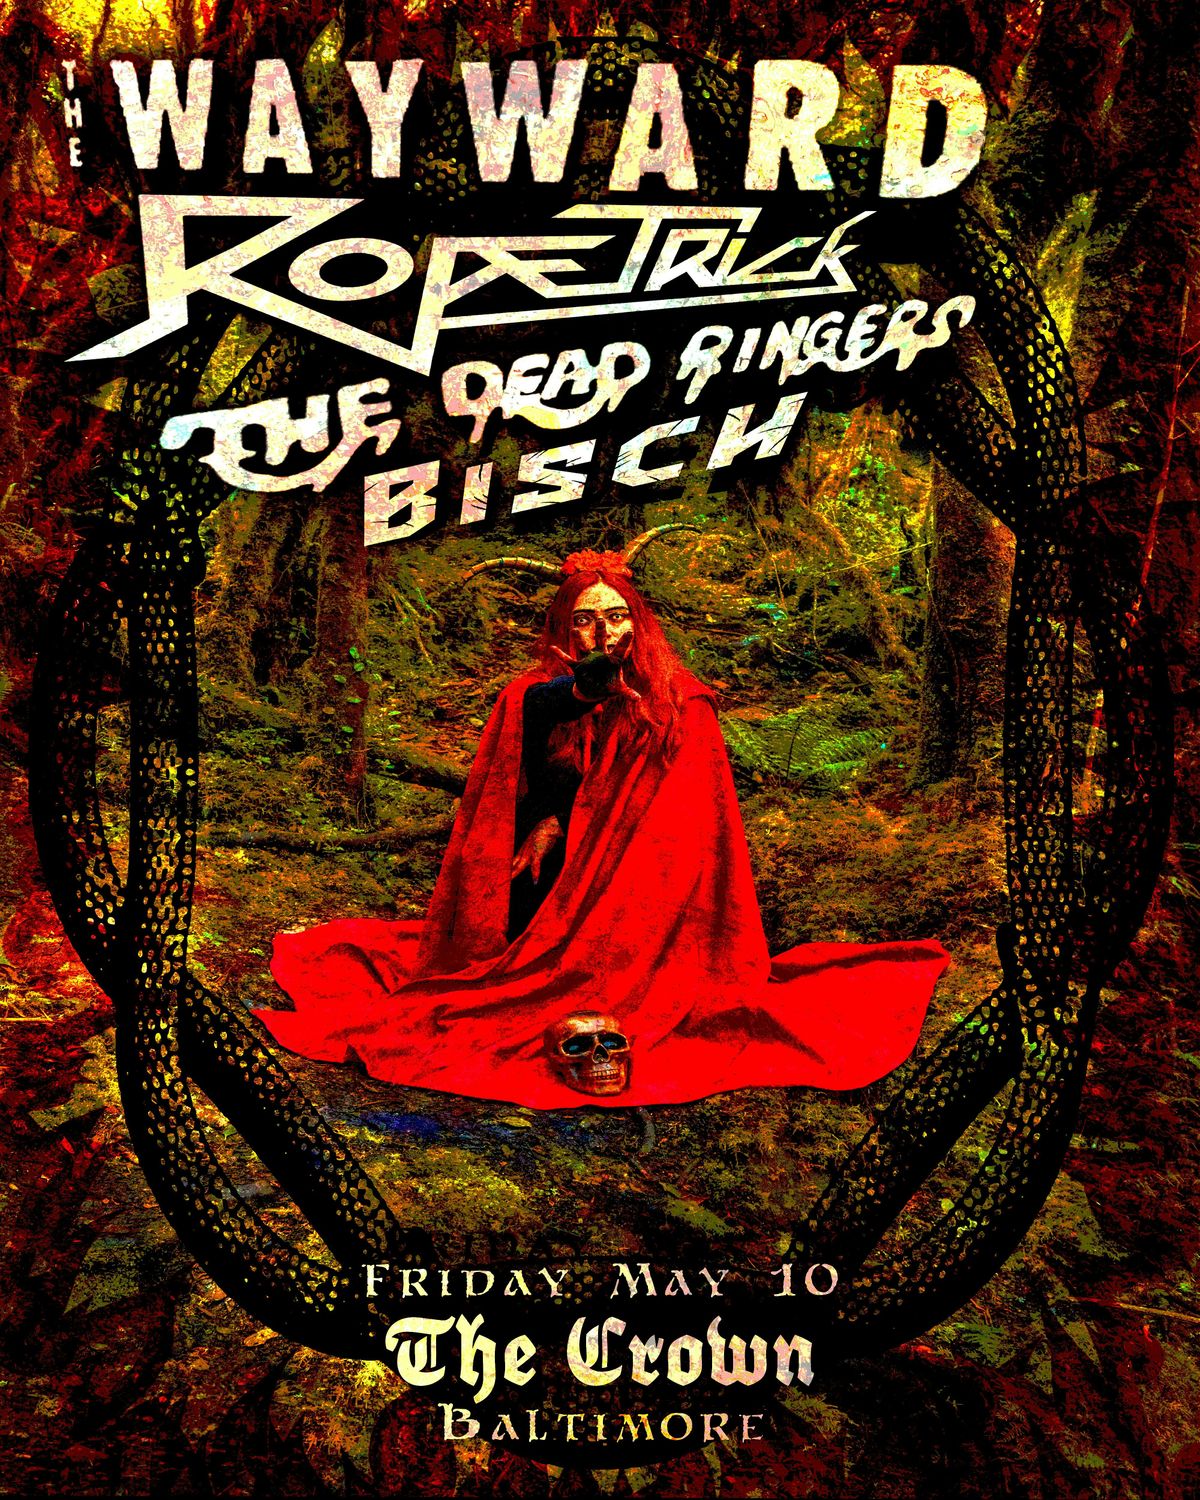 The Wayward \/ Rope Trick (Philly) \/ The Dead Ringers \/ BISCH